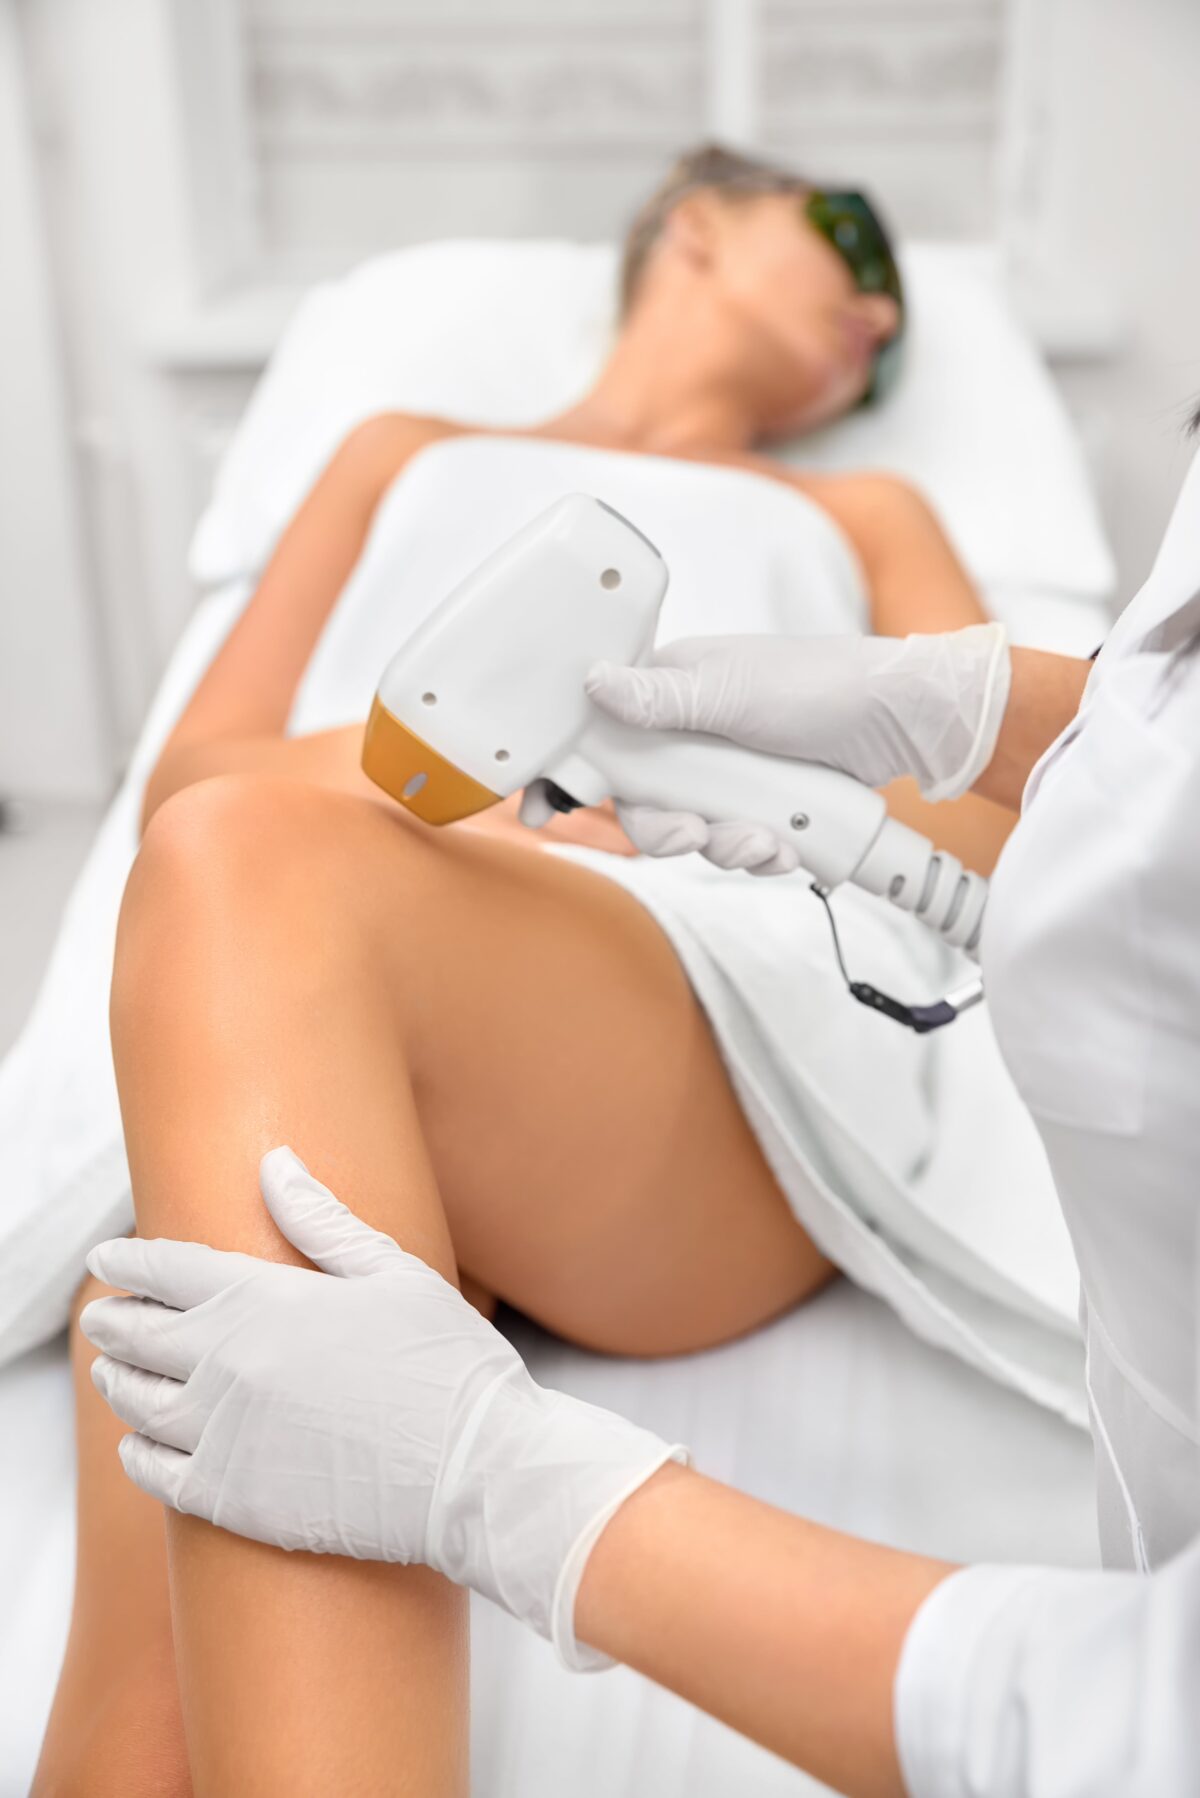 woman having laser hair removal on her legs